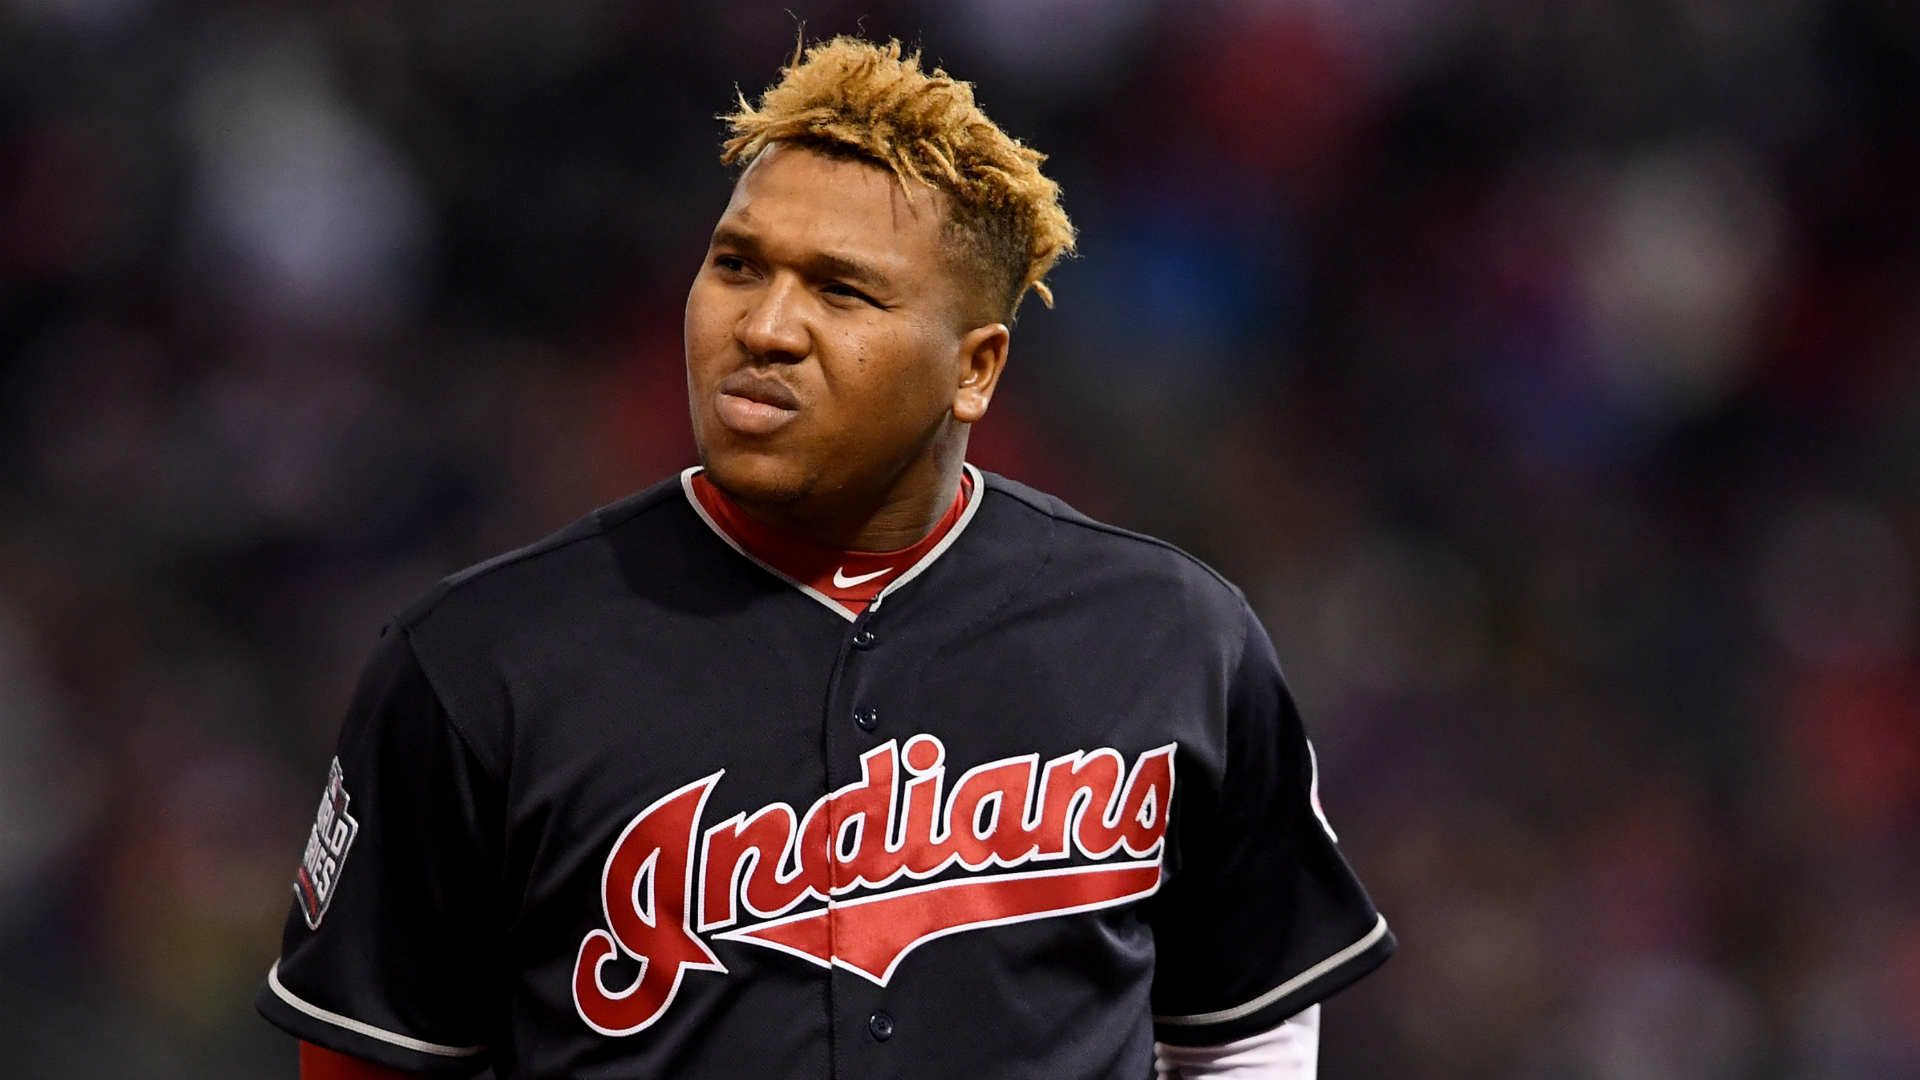 Jose Ramirez 'very grateful' for new deal from Indians